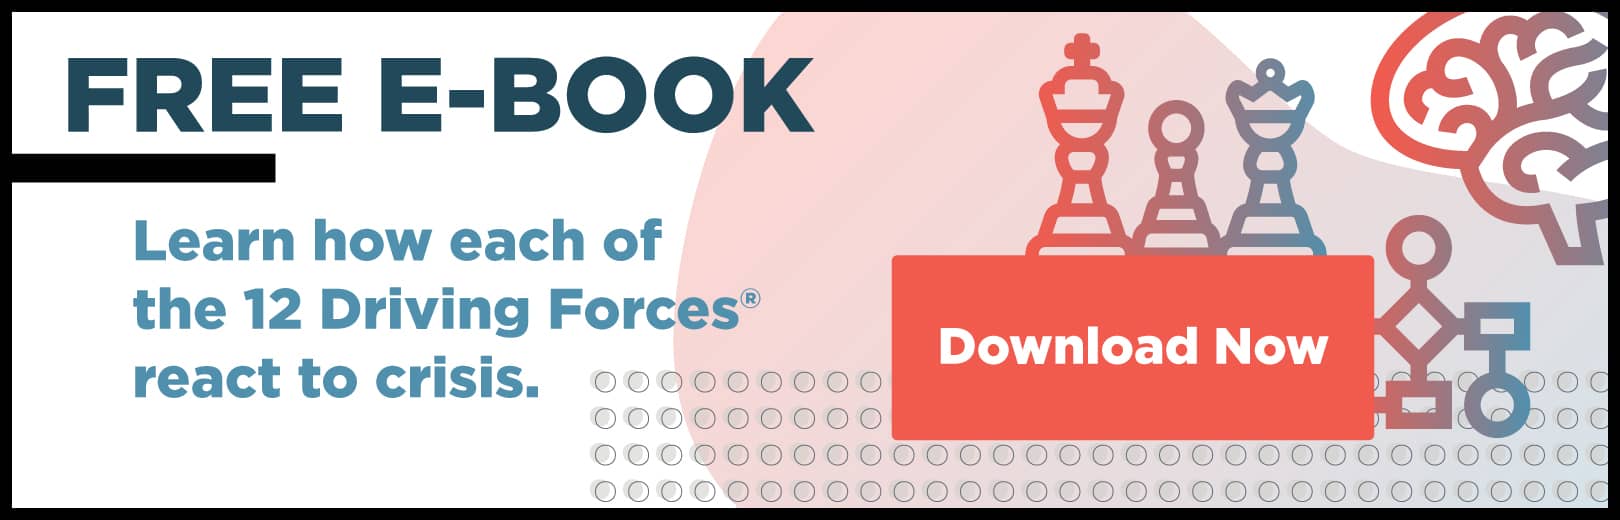 Free Ebook - Learn how each of the 12 Driving Forces® react to crisis